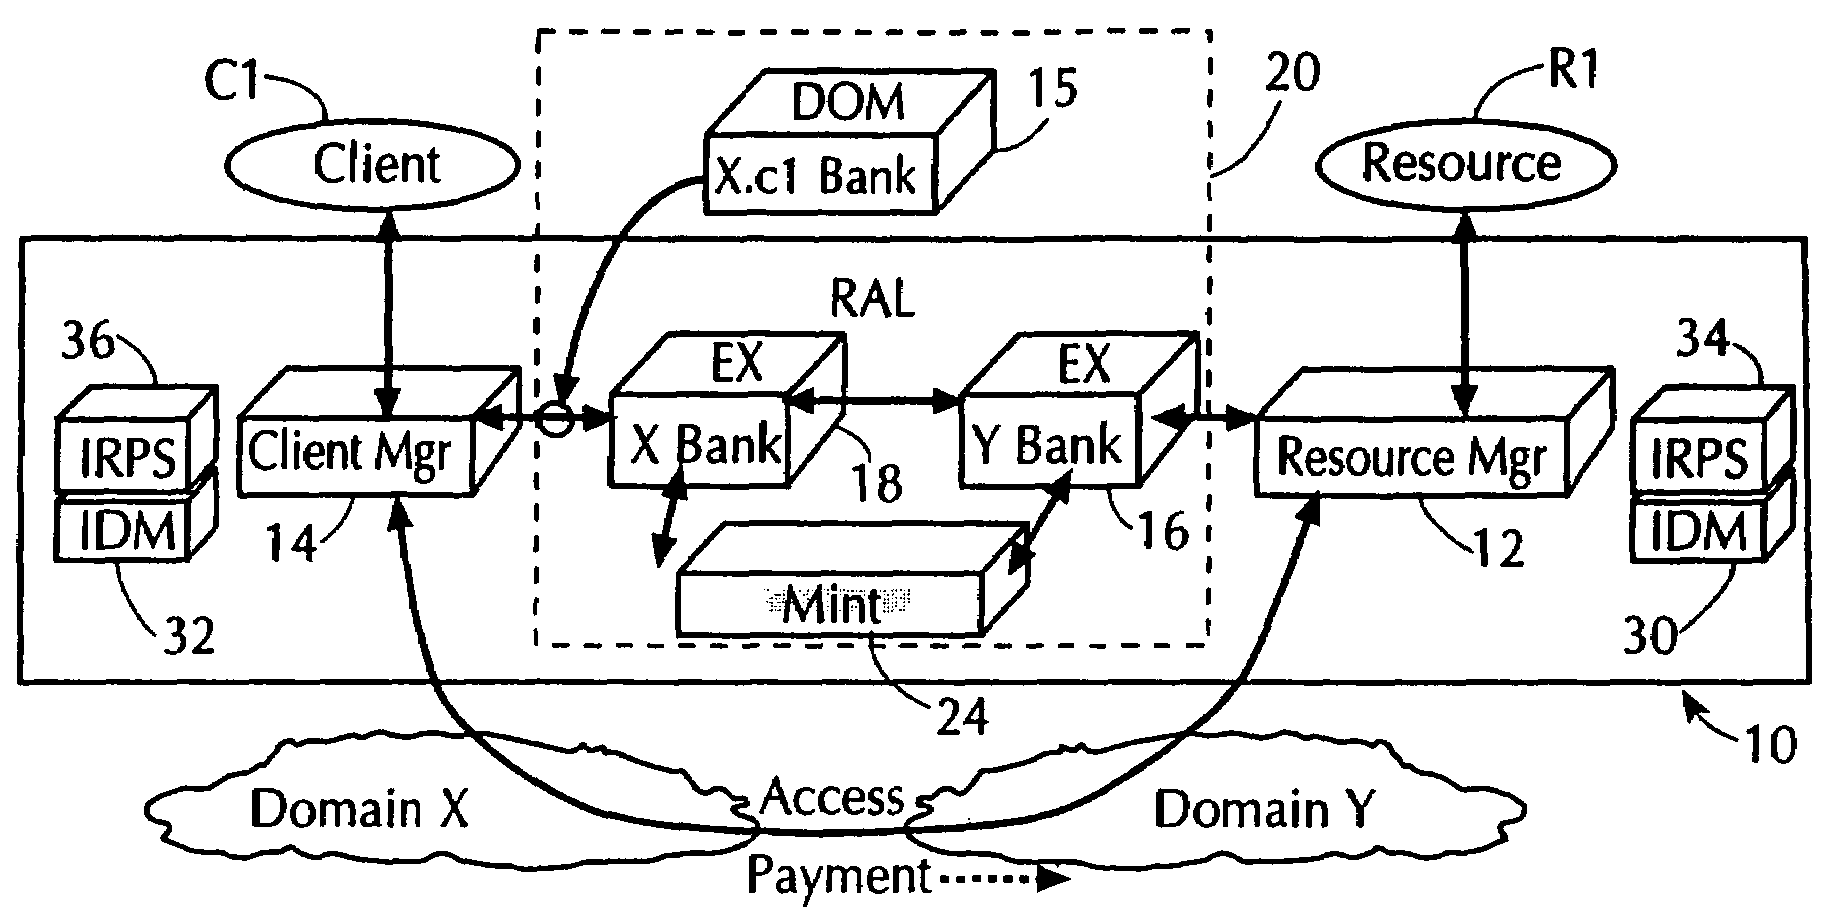 Identification of an attacker in an electronic system